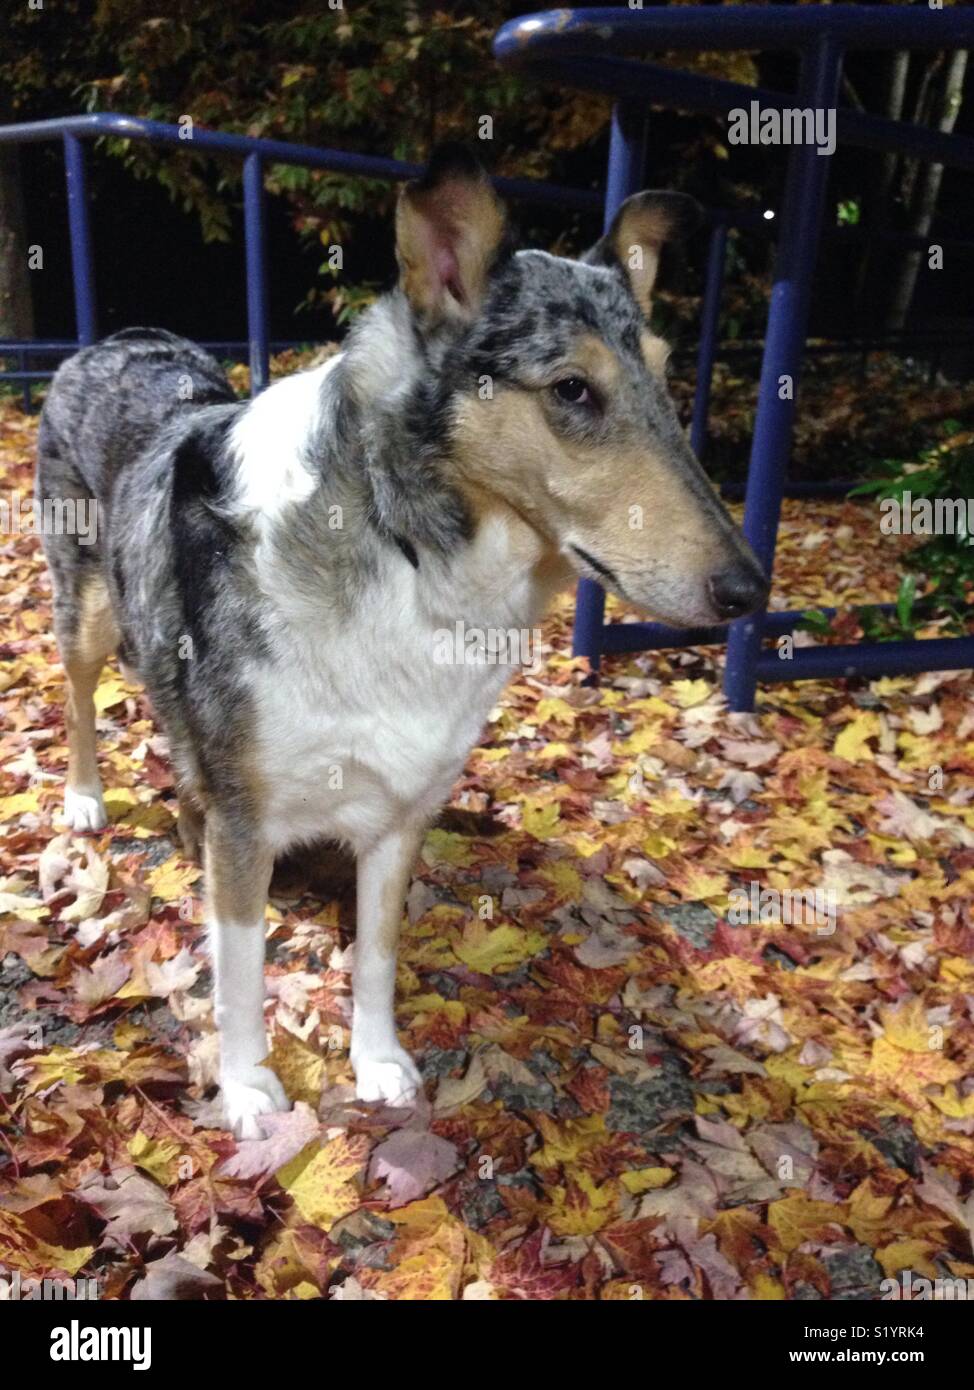 Smooth collie standing in fallen leaves Stock Photo